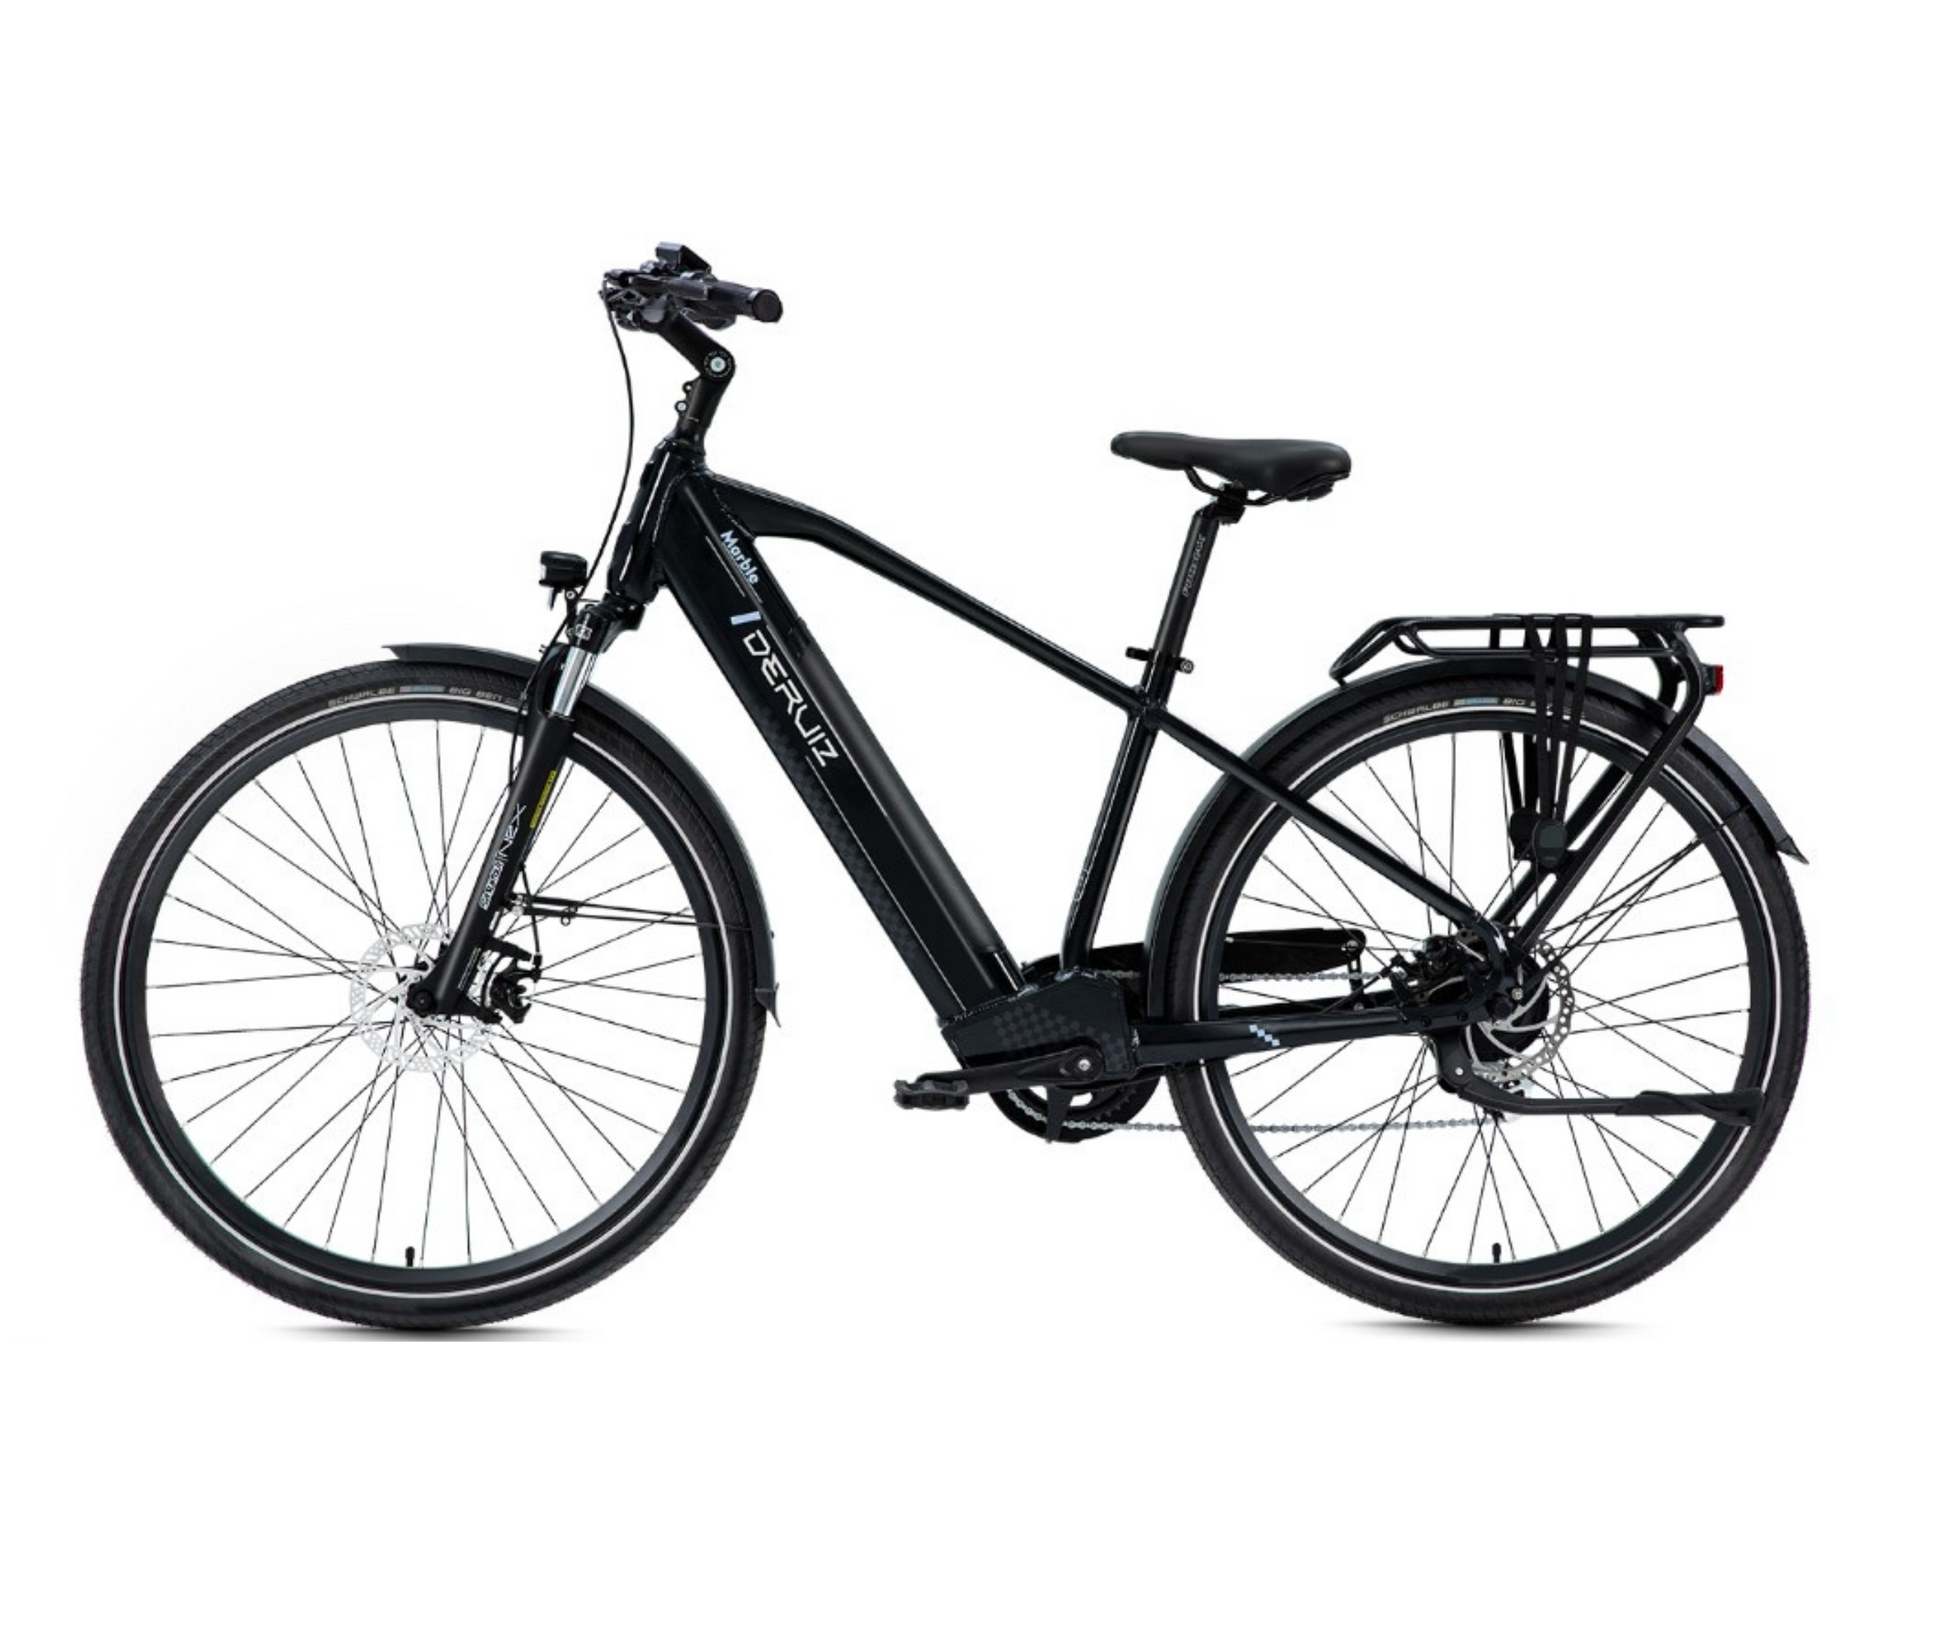 Full profile of the Deruiz Marble e-bike highlighting its pedal-assist system and elegant black finish for sustainable travel.